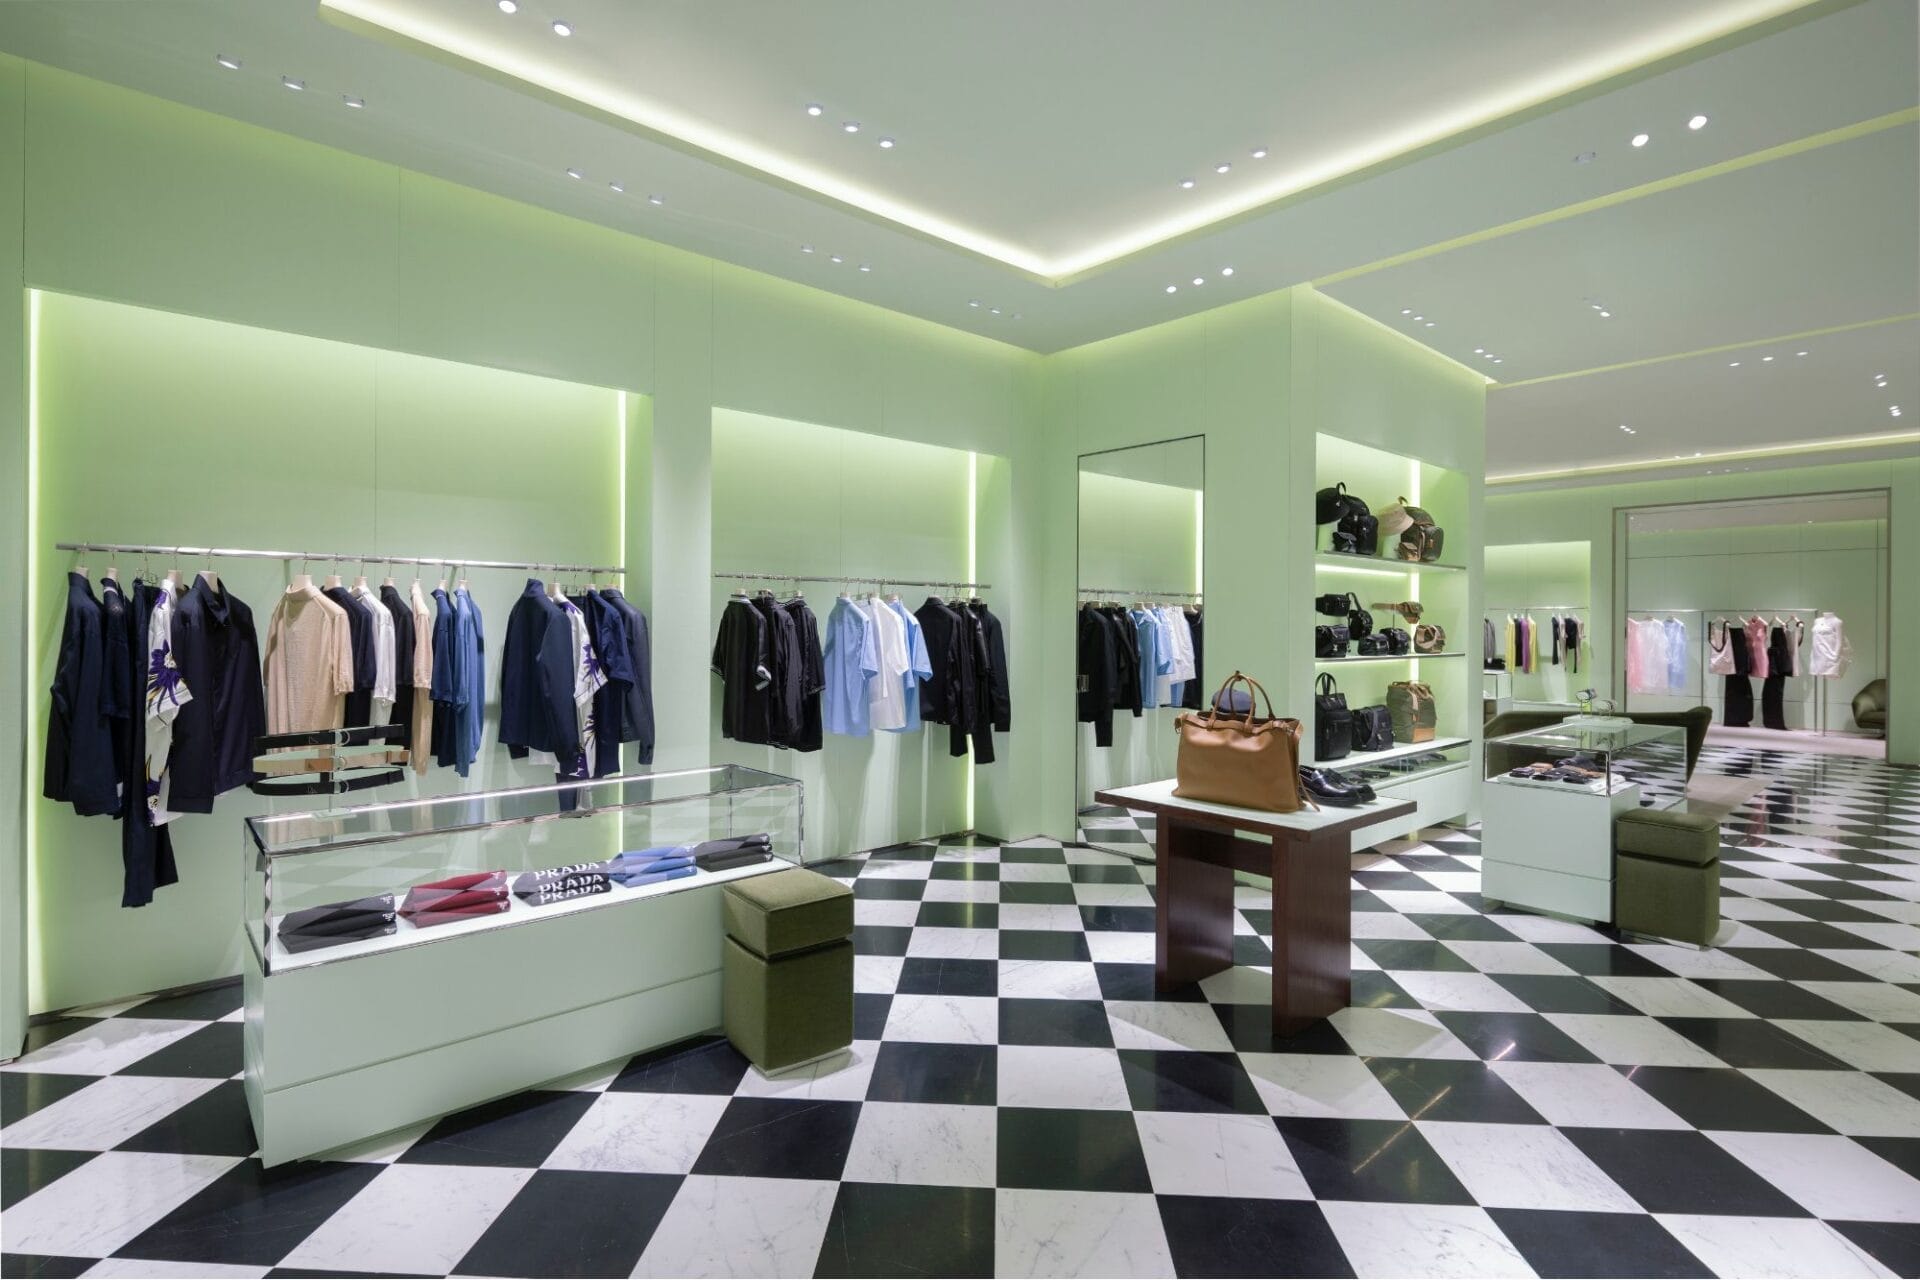 the new boutique showcases a wide selection of women’s and men’s collections.